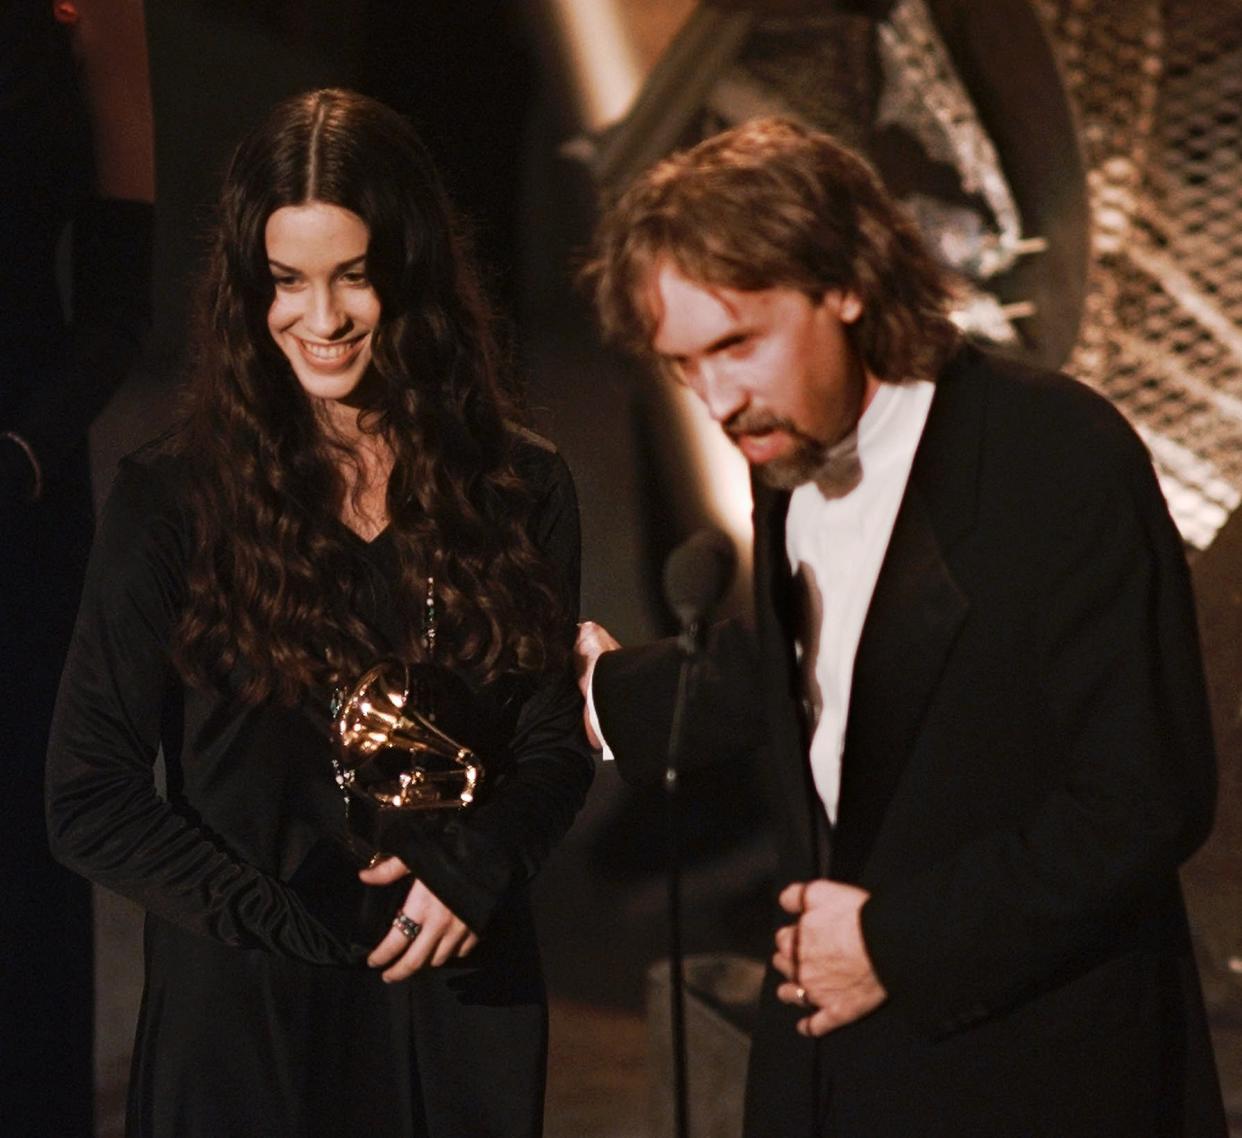 Alanis Morissette and record producer Glen Ballard accept the award for Album of the Year at the 38th annual Grammy Awards. (Photo: AP/Eric Draper)